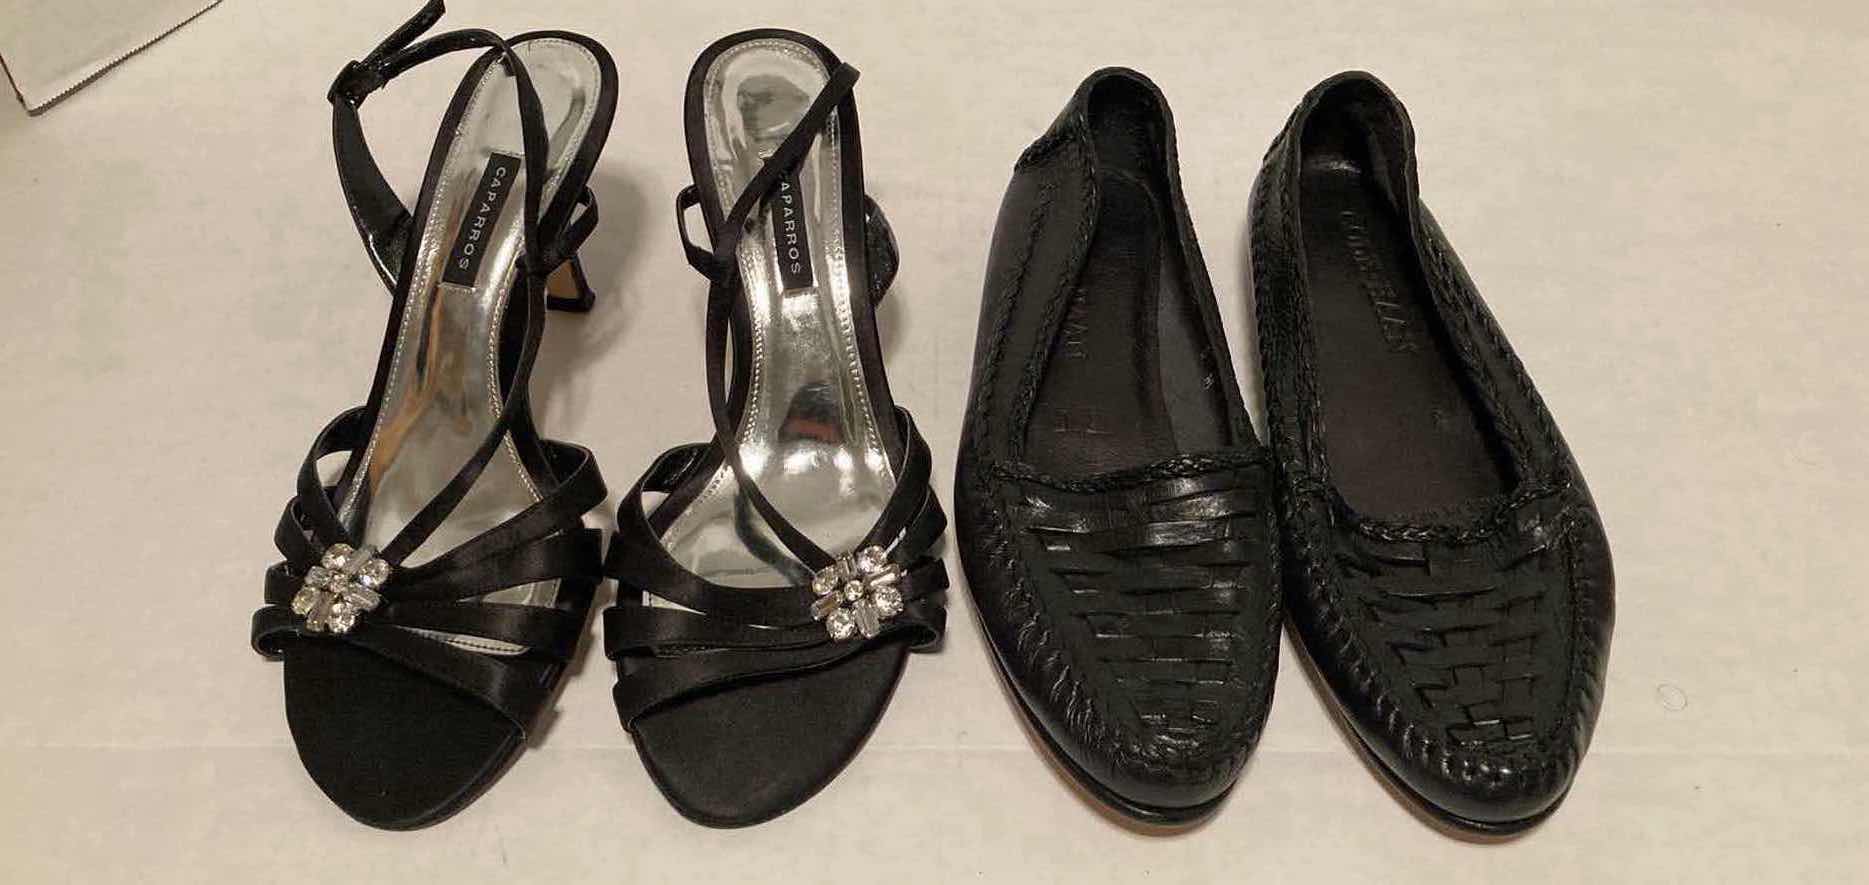 Photo 8 of CAPARROS BLACK OPEN TOE HEELS & COLE HAAN BLACK WOVEN LEATHER LOAFERS WOMEN’S SIZE 8-8.5